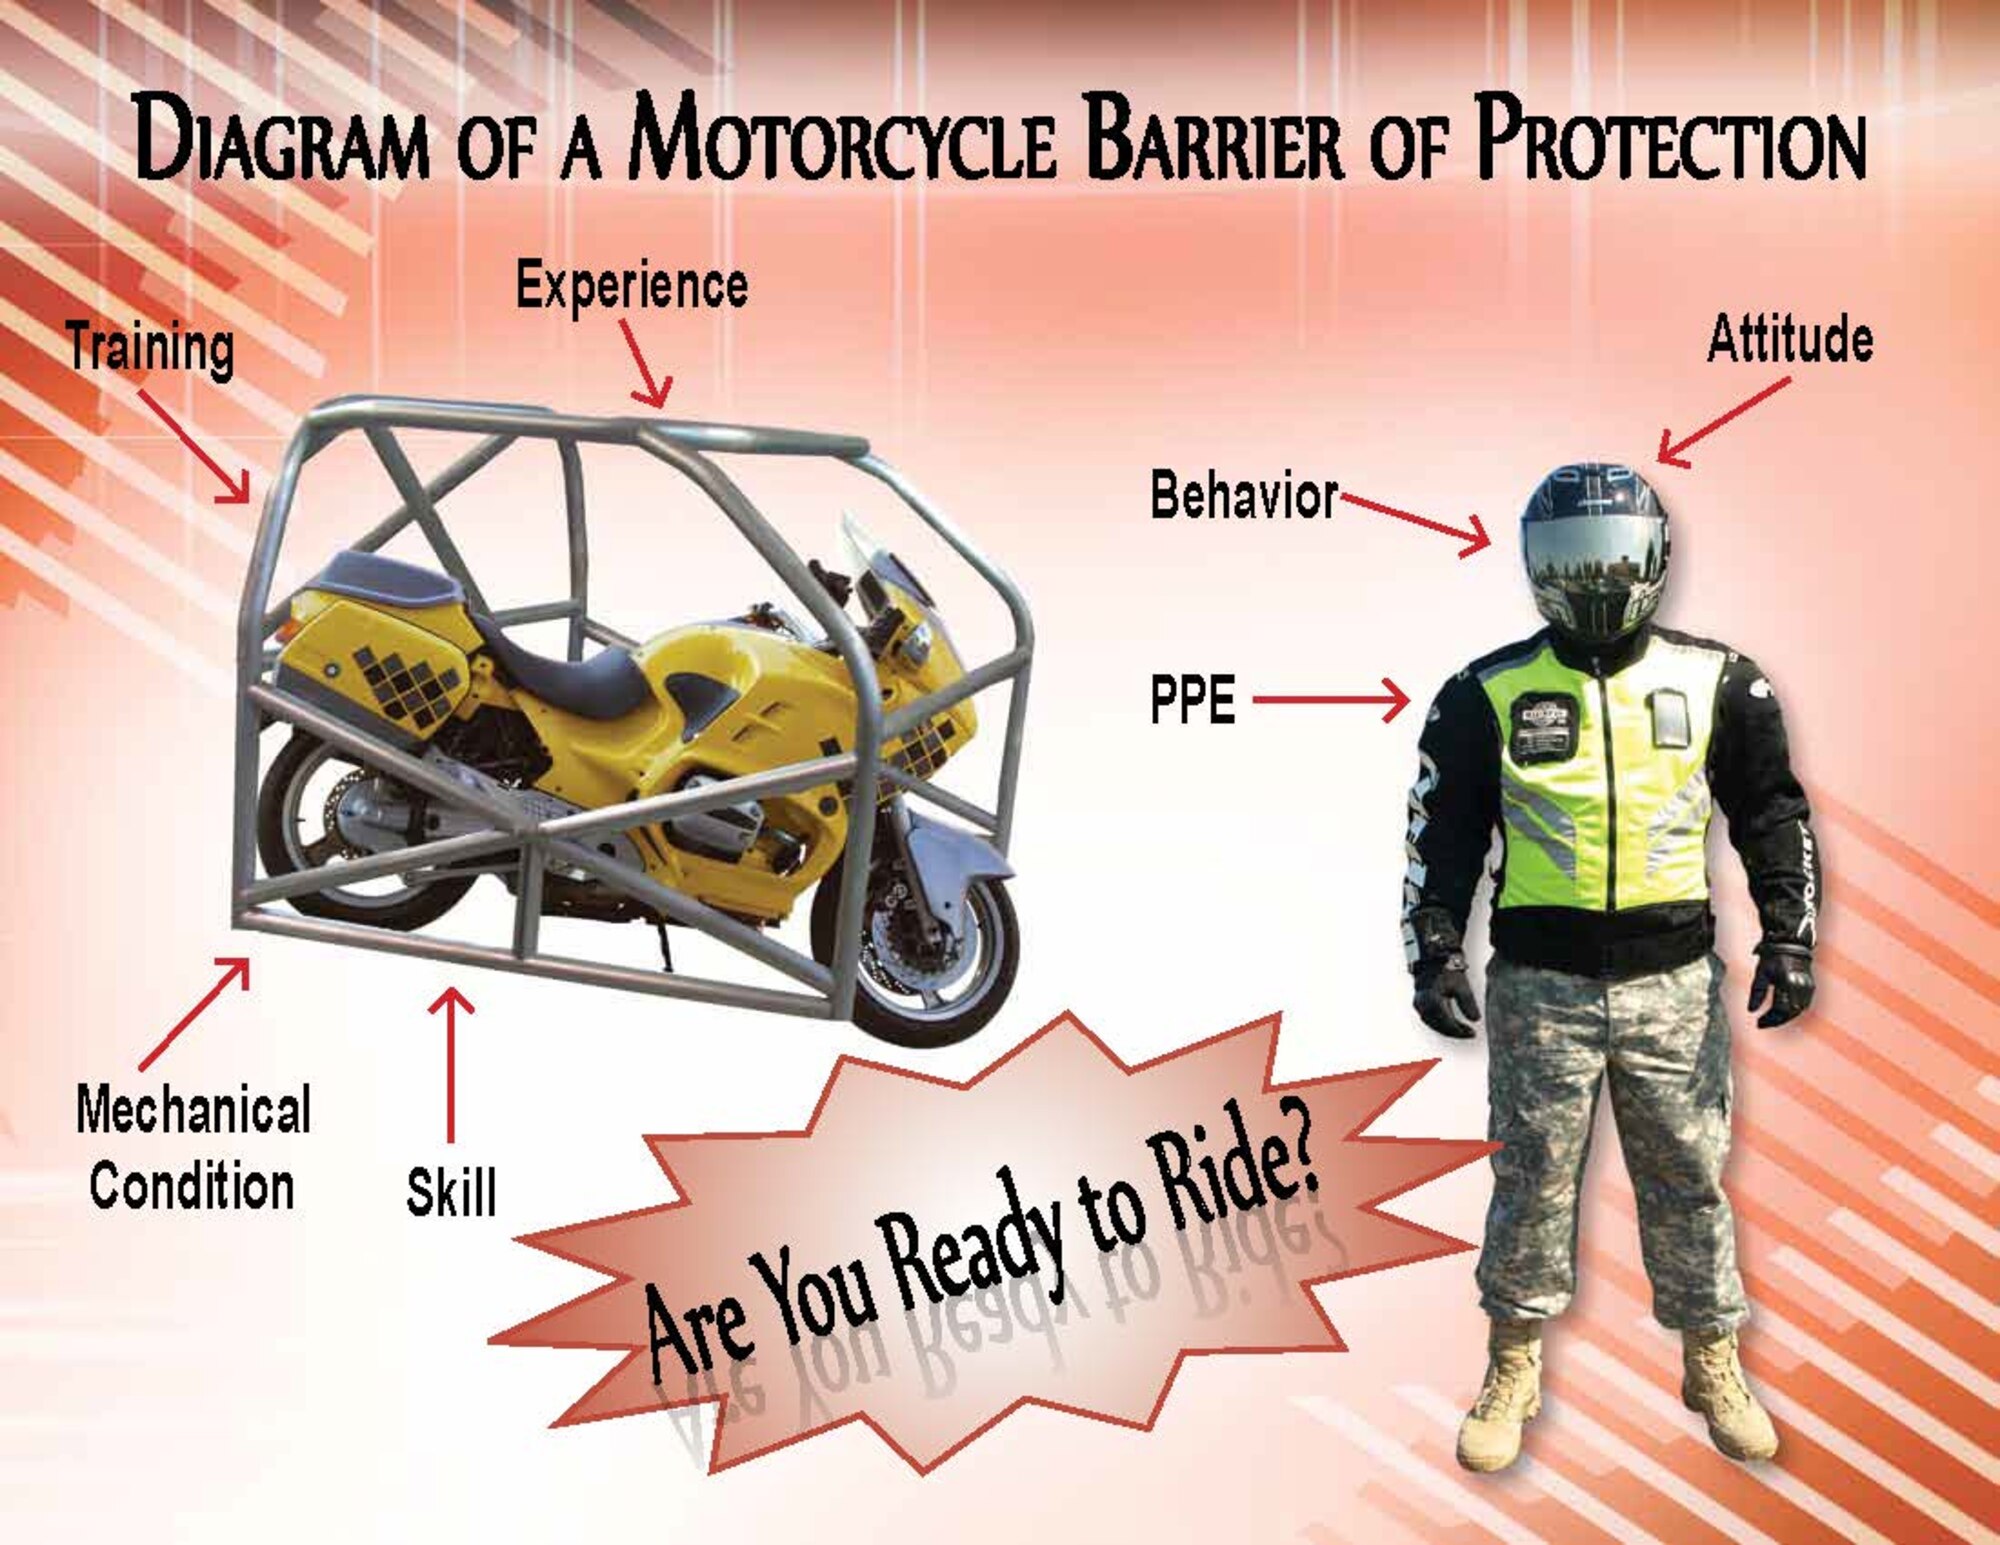 The Barrier of Protection poster is a 2012 Summer Campaign tool for Air Force personnel as a reminder of the perceived and real barrier of protection for motorcycle riders. 